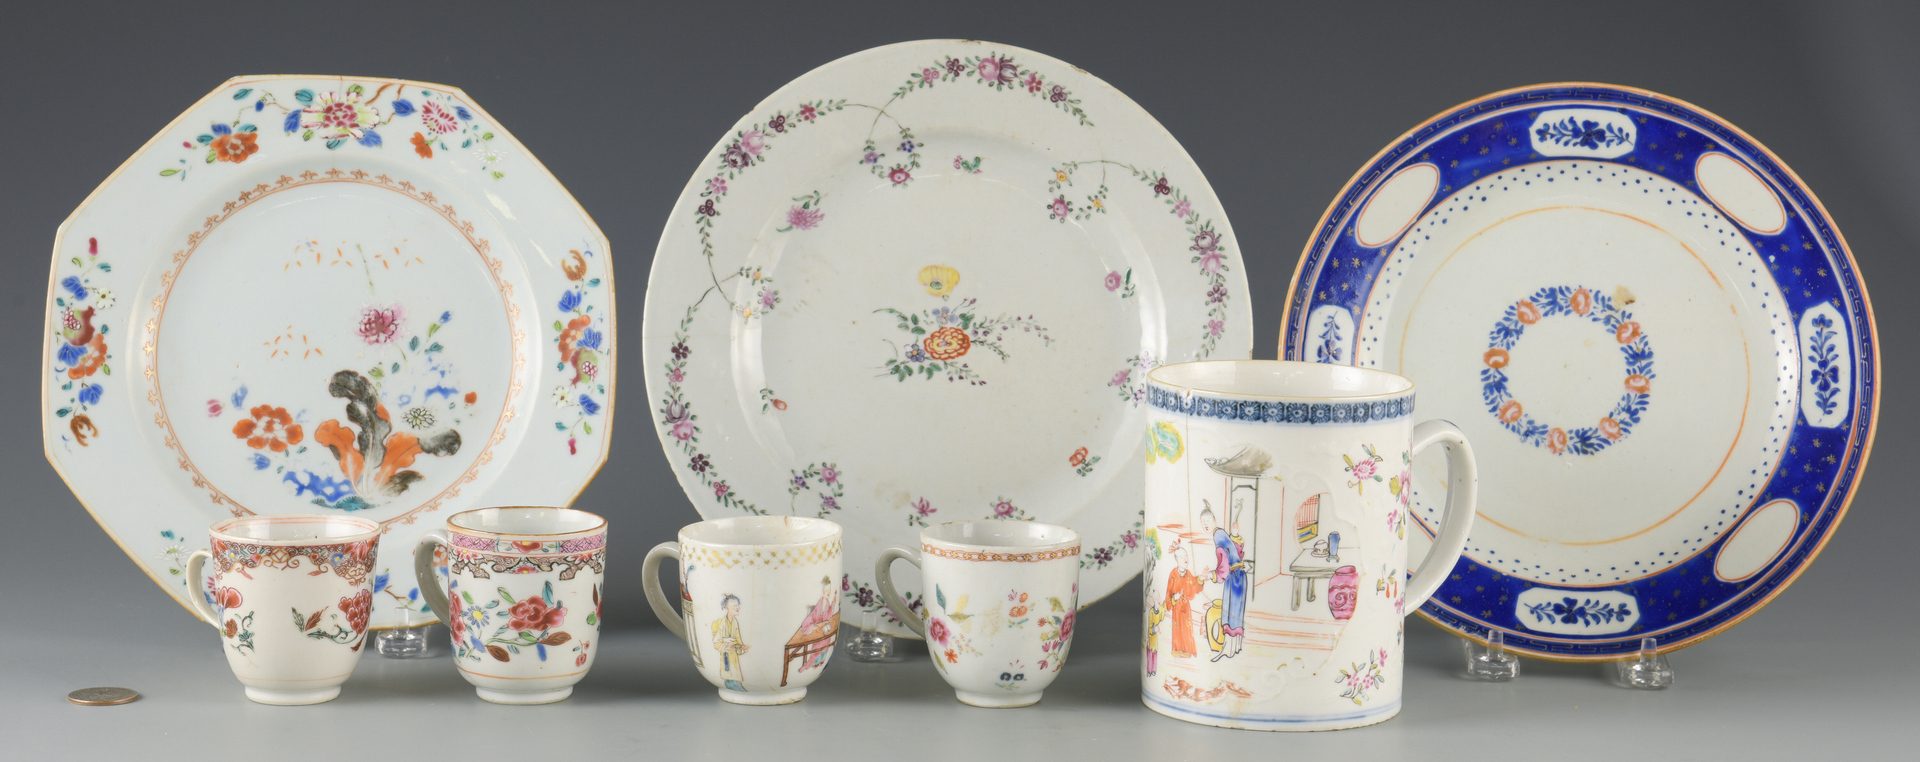 Lot 263: 8 Chinese Export Porcelain Items inc. cups, plates